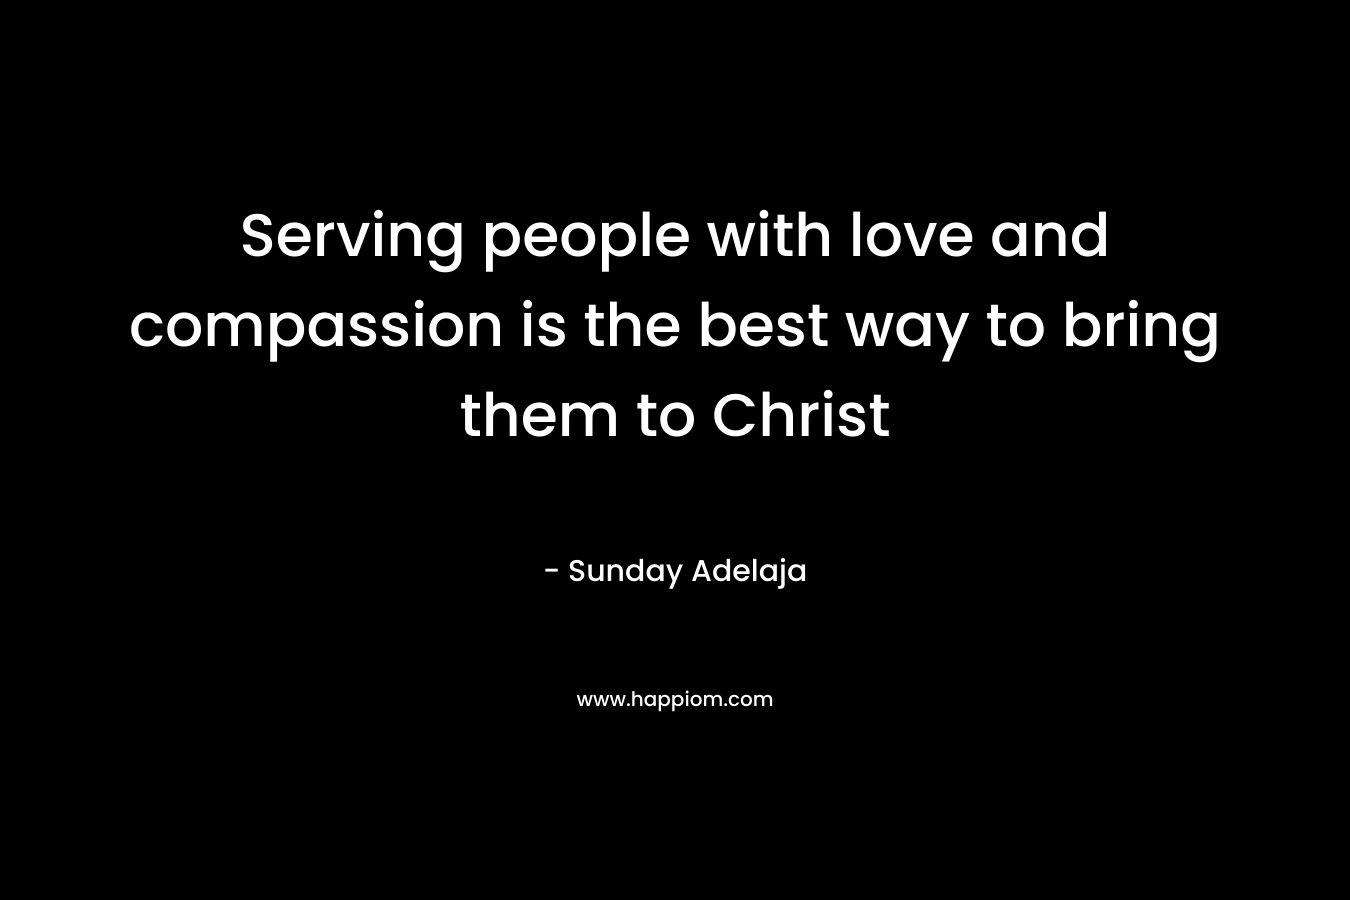 Serving people with love and compassion is the best way to bring them to Christ